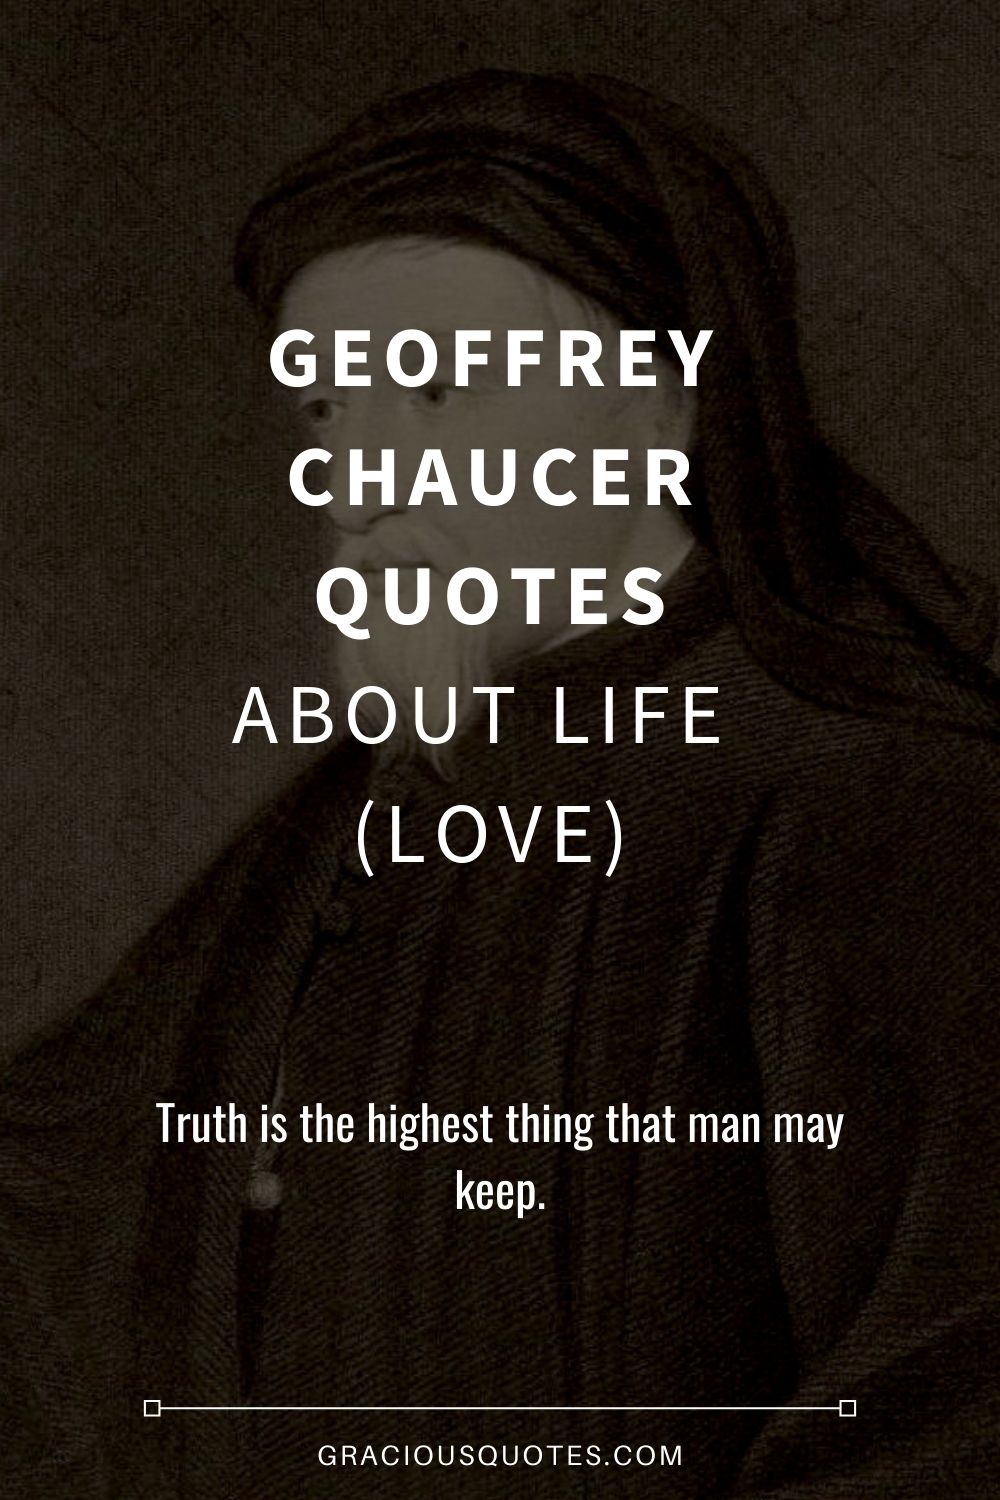 Geoffrey Chaucer Quotes About Life (LOVE) - Gracious Quotes